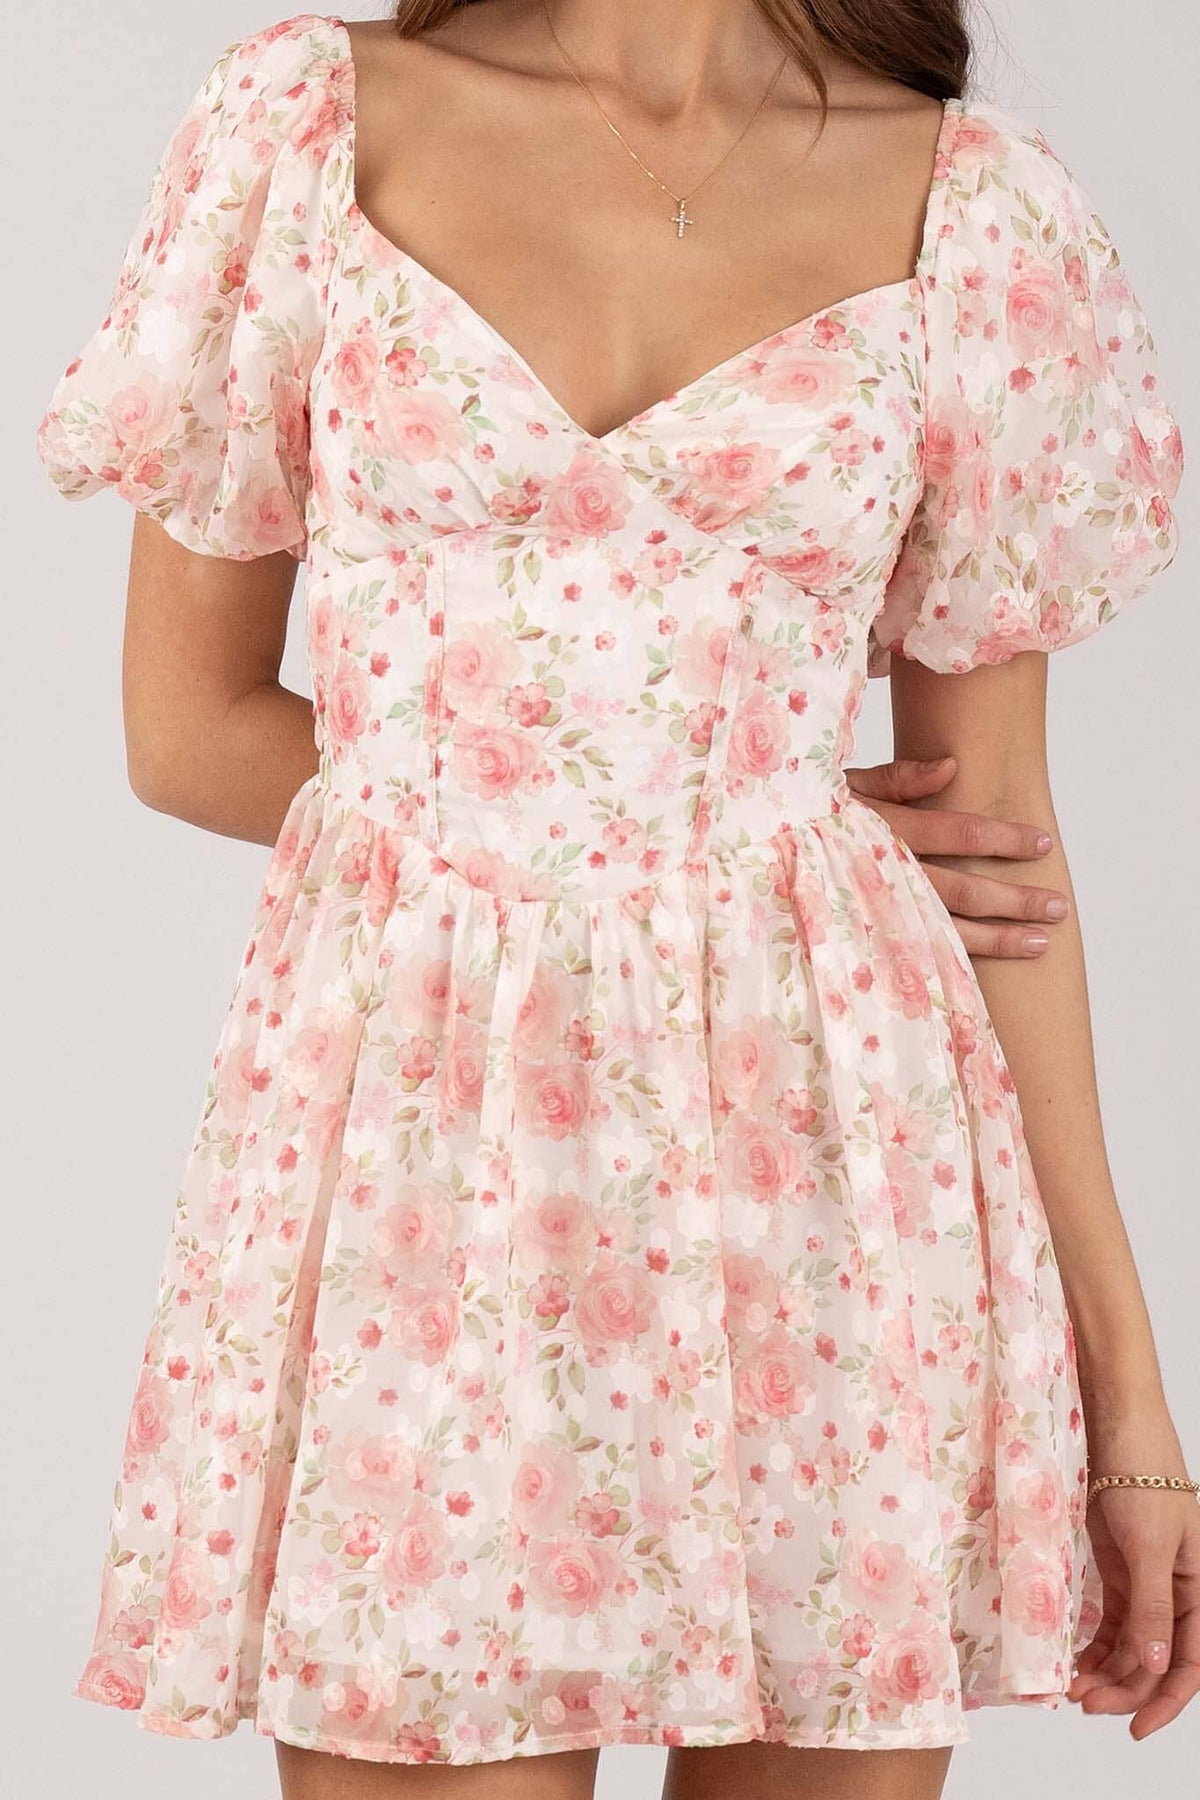 Close Up Image of Pink Floral Mini Dress with Sweetheart Neckline and Puff Sleeves